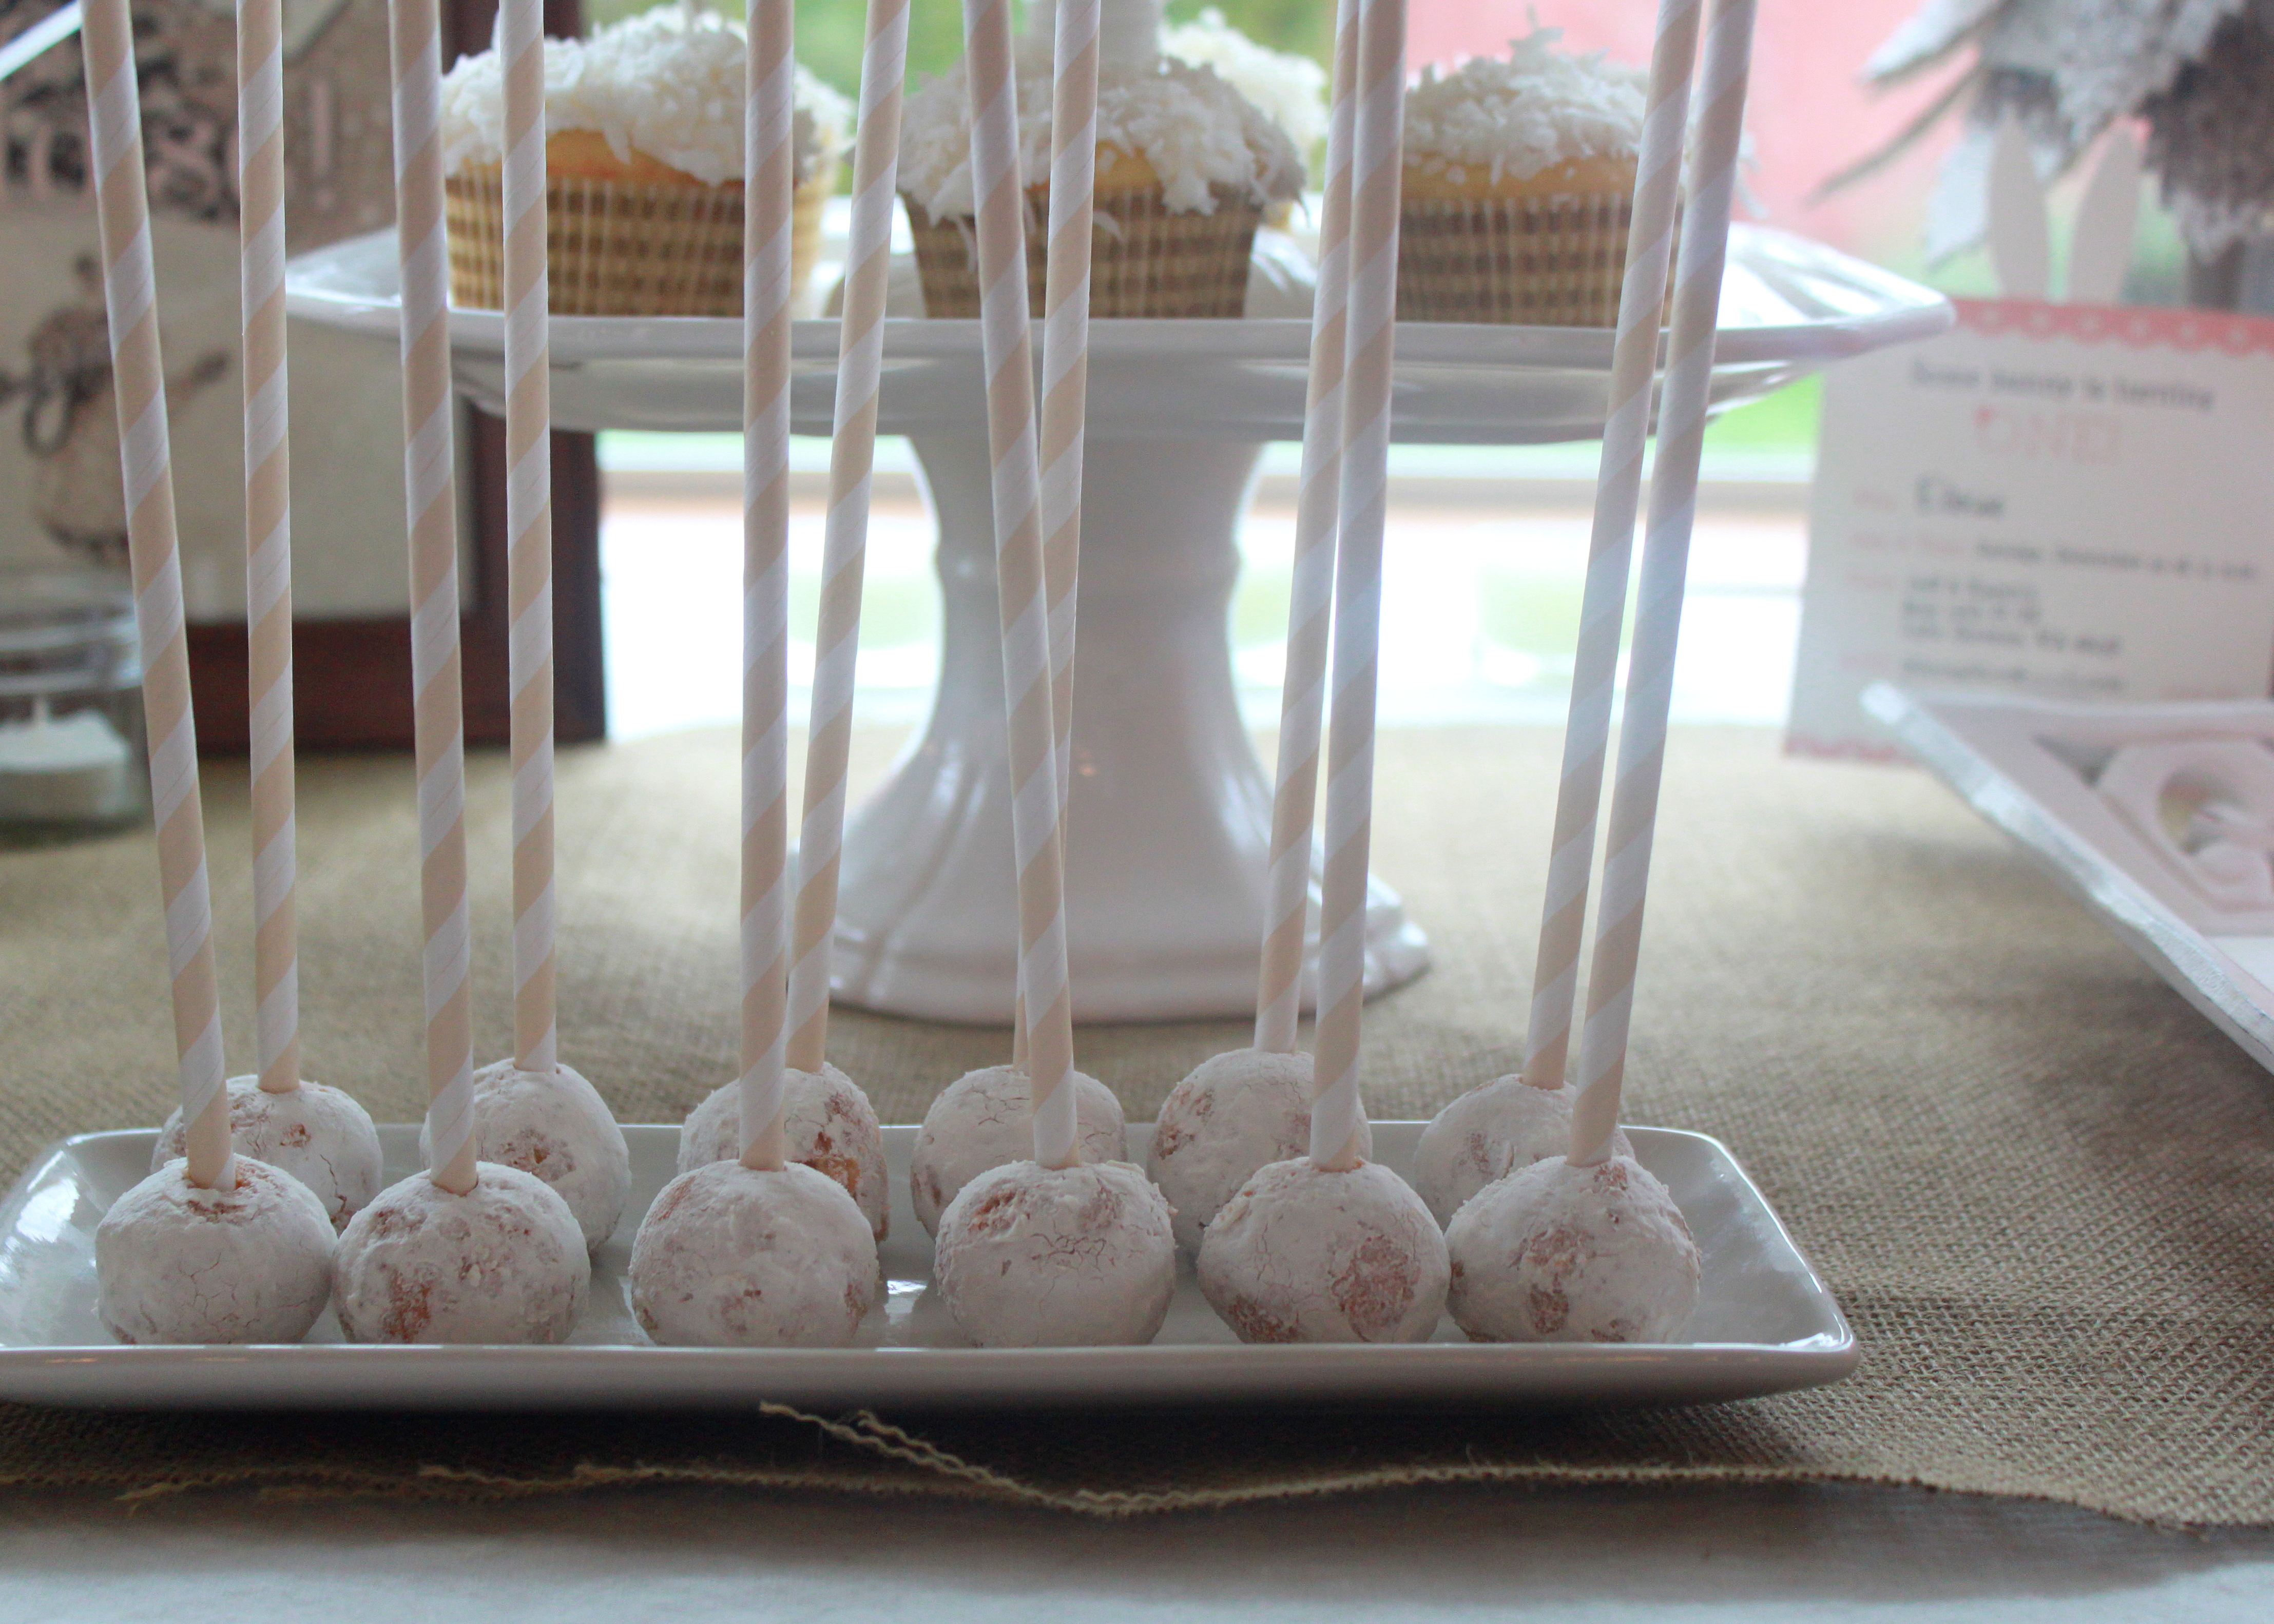 Lazy "cake pops" made with donut holes & striped paper straws | Kitchen Treaty